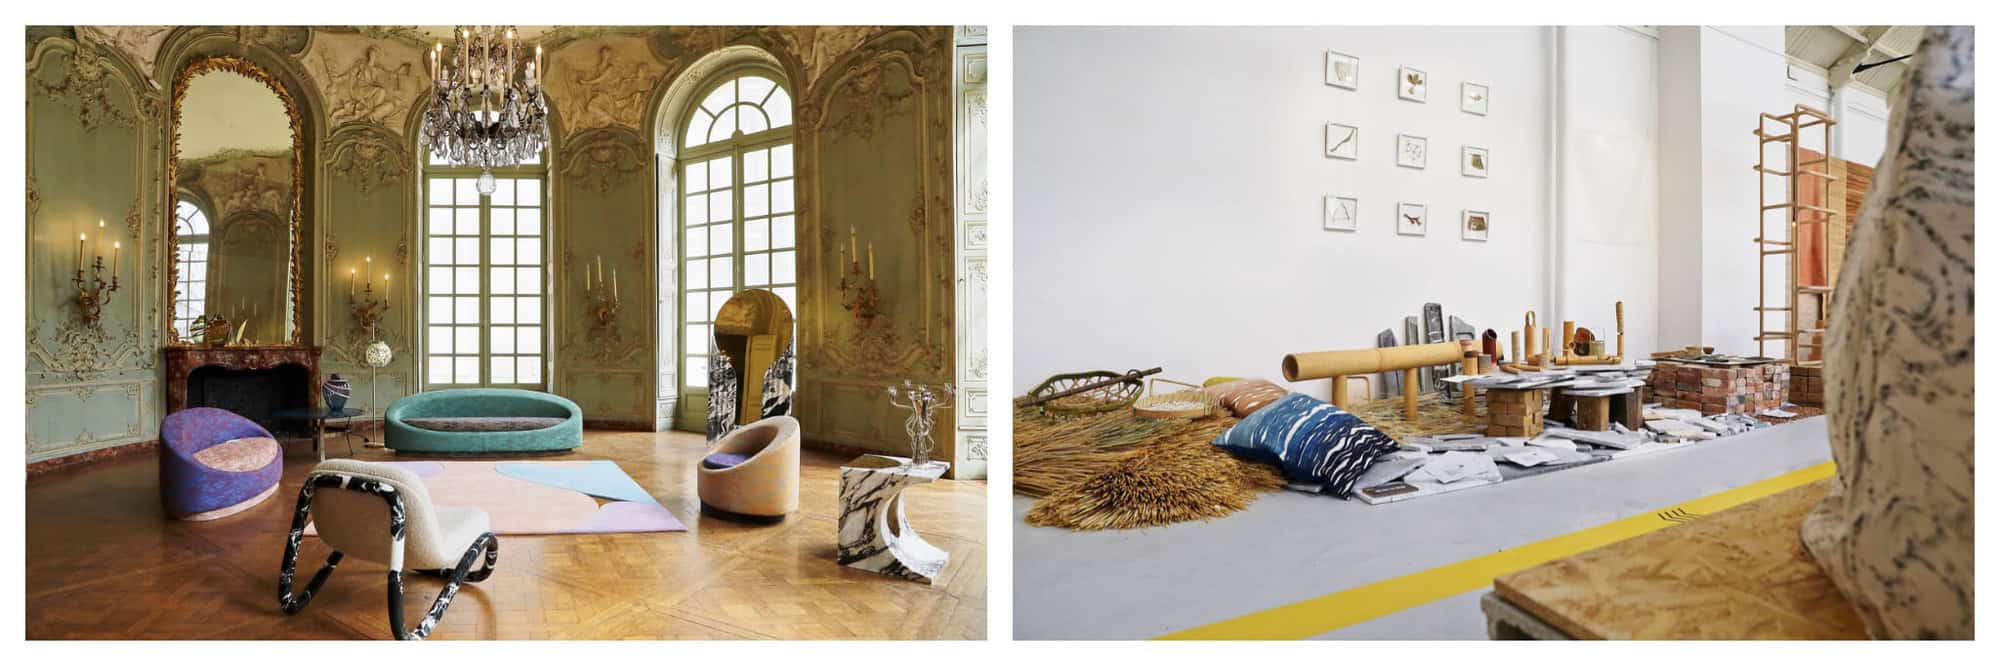 Left: an opulent traditional French interior with modern furniture for Paris Design Week. Right: an exhibition of design objects for Paris Design Week.